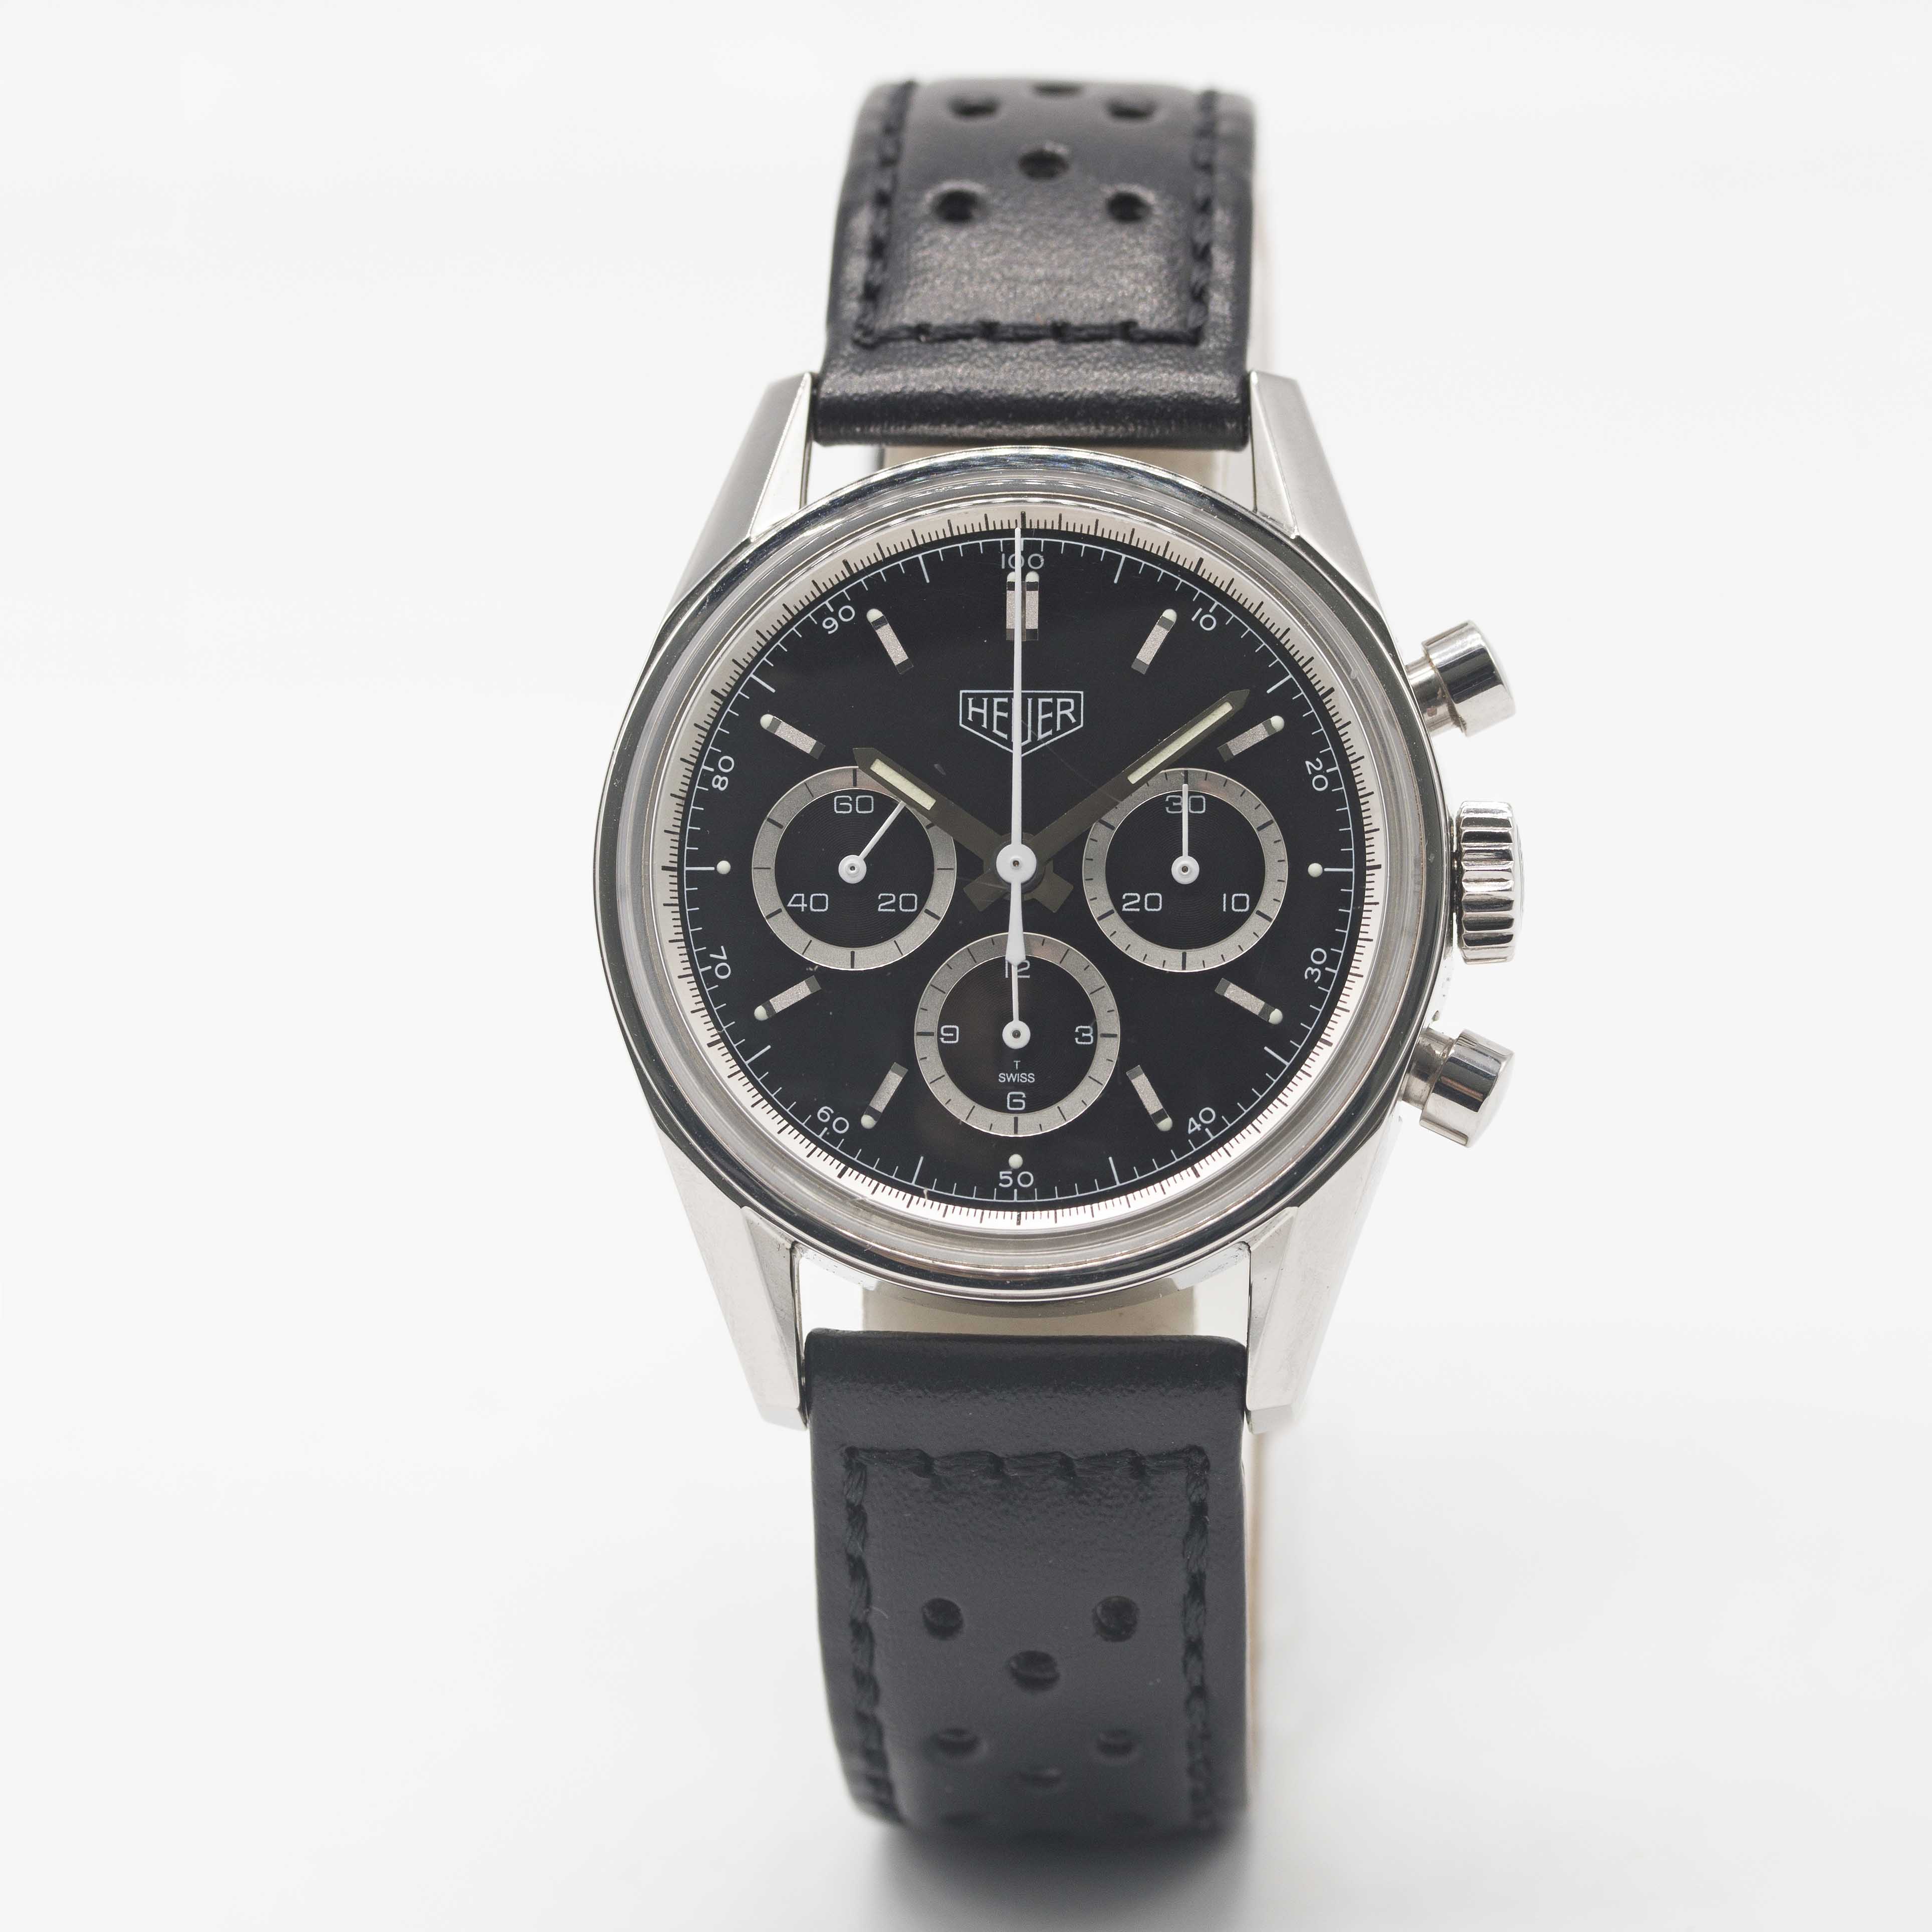 A GENTLEMAN'S STAINLESS STEEL HEUER CLASSIC CARRERA CHRONOGRAPH WRIST WATCH DATED 2000, REF. - Image 2 of 7